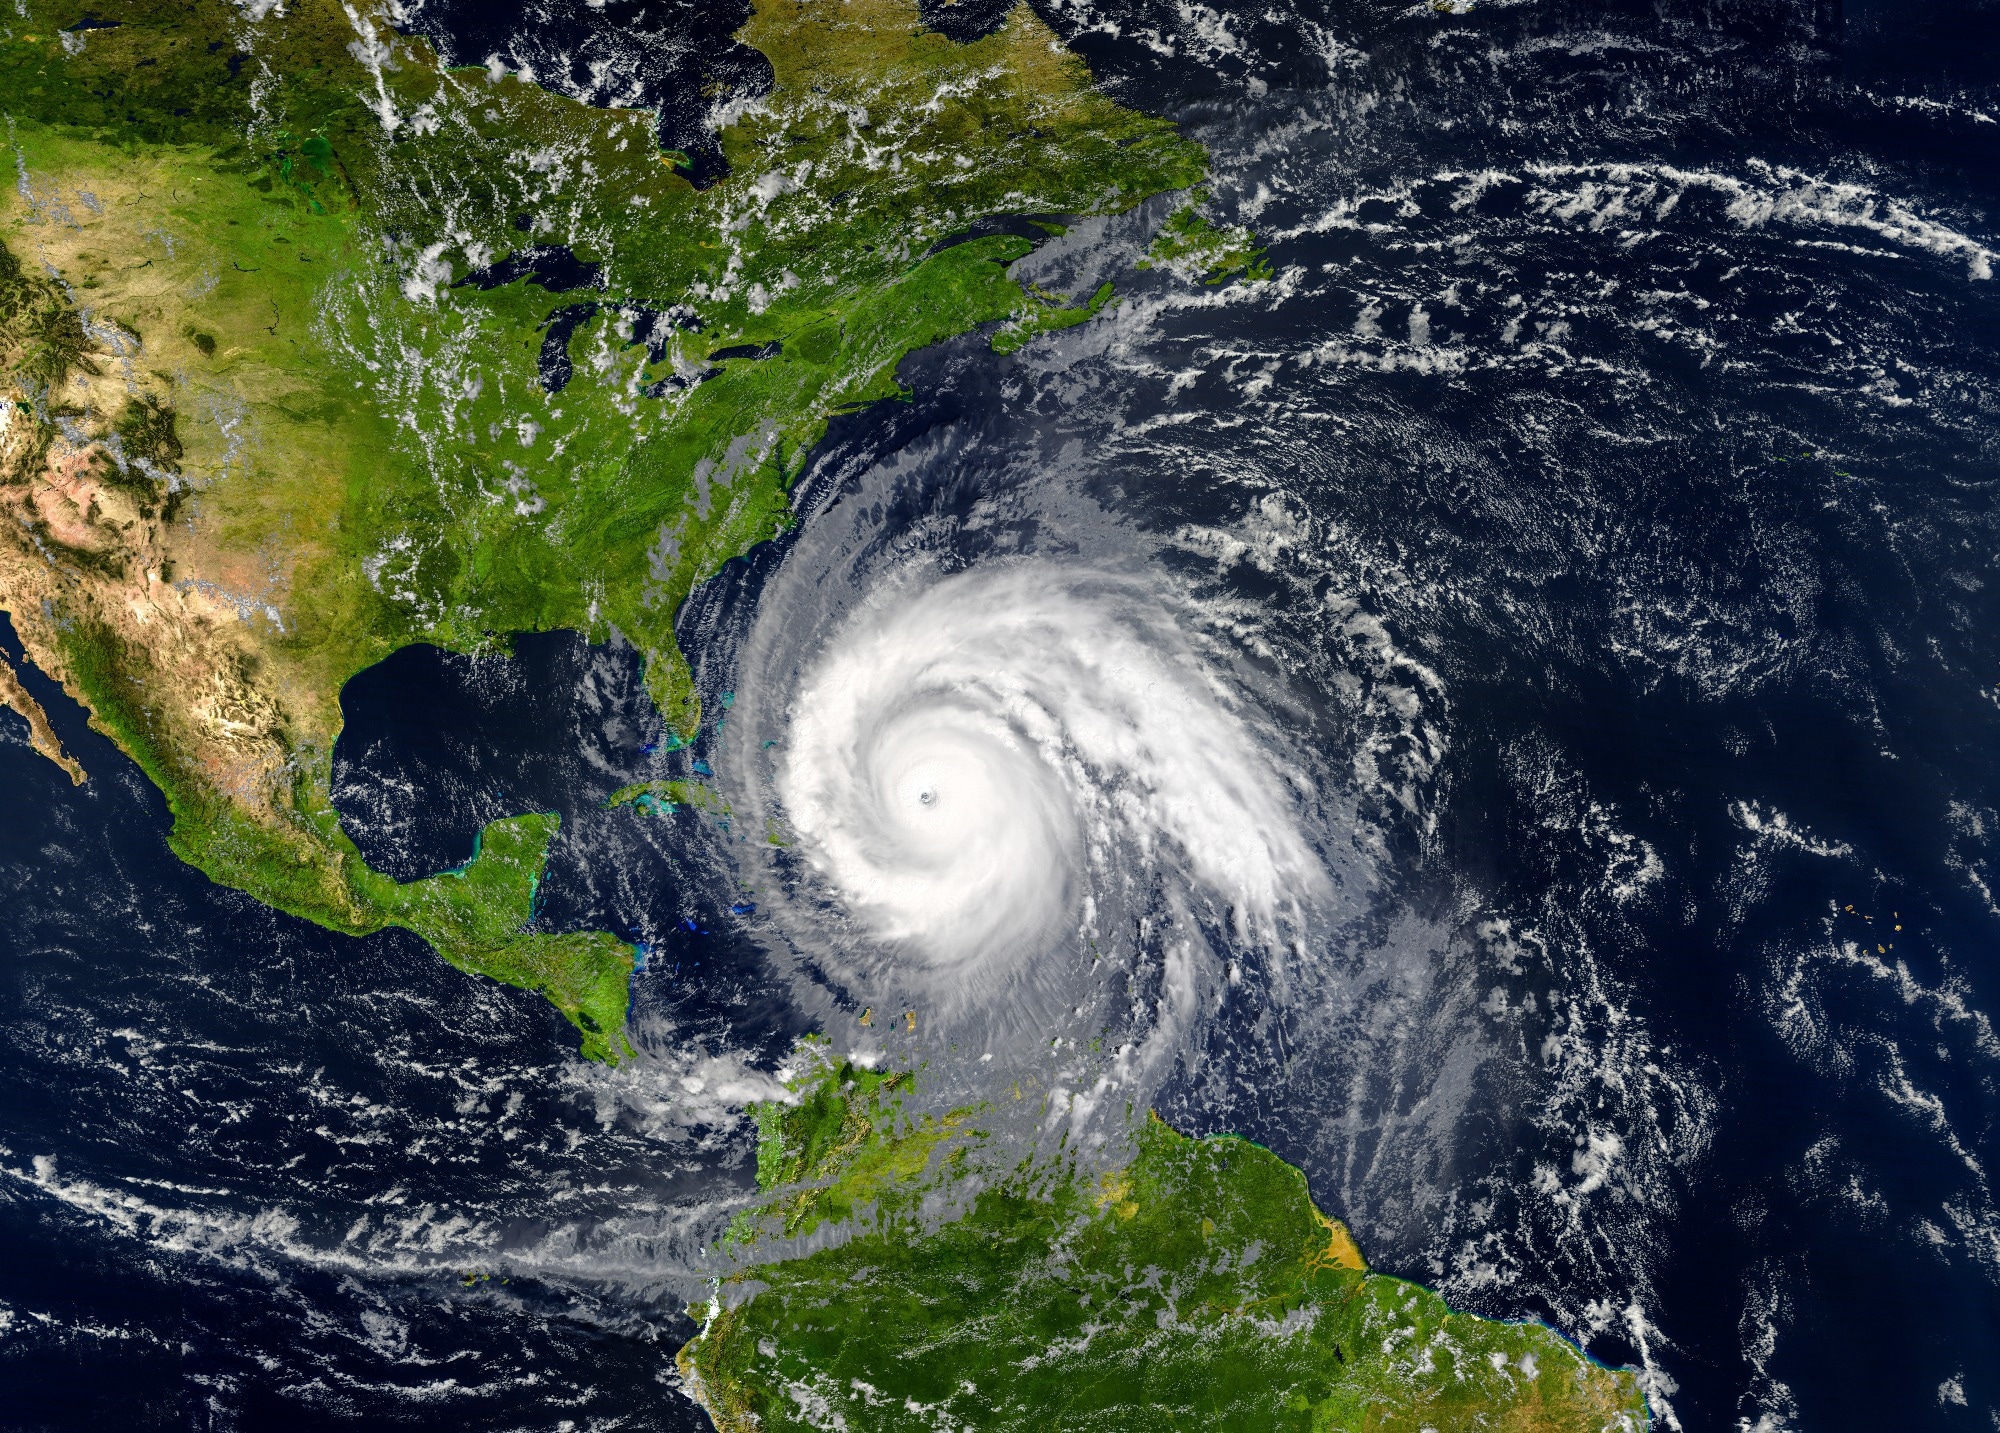 Study: Health Effects of Cyclones: A Systematic Review and Meta-Analysis of Epidemiological Studies. Image Credit: Mike Mareen / Shutterstock.com